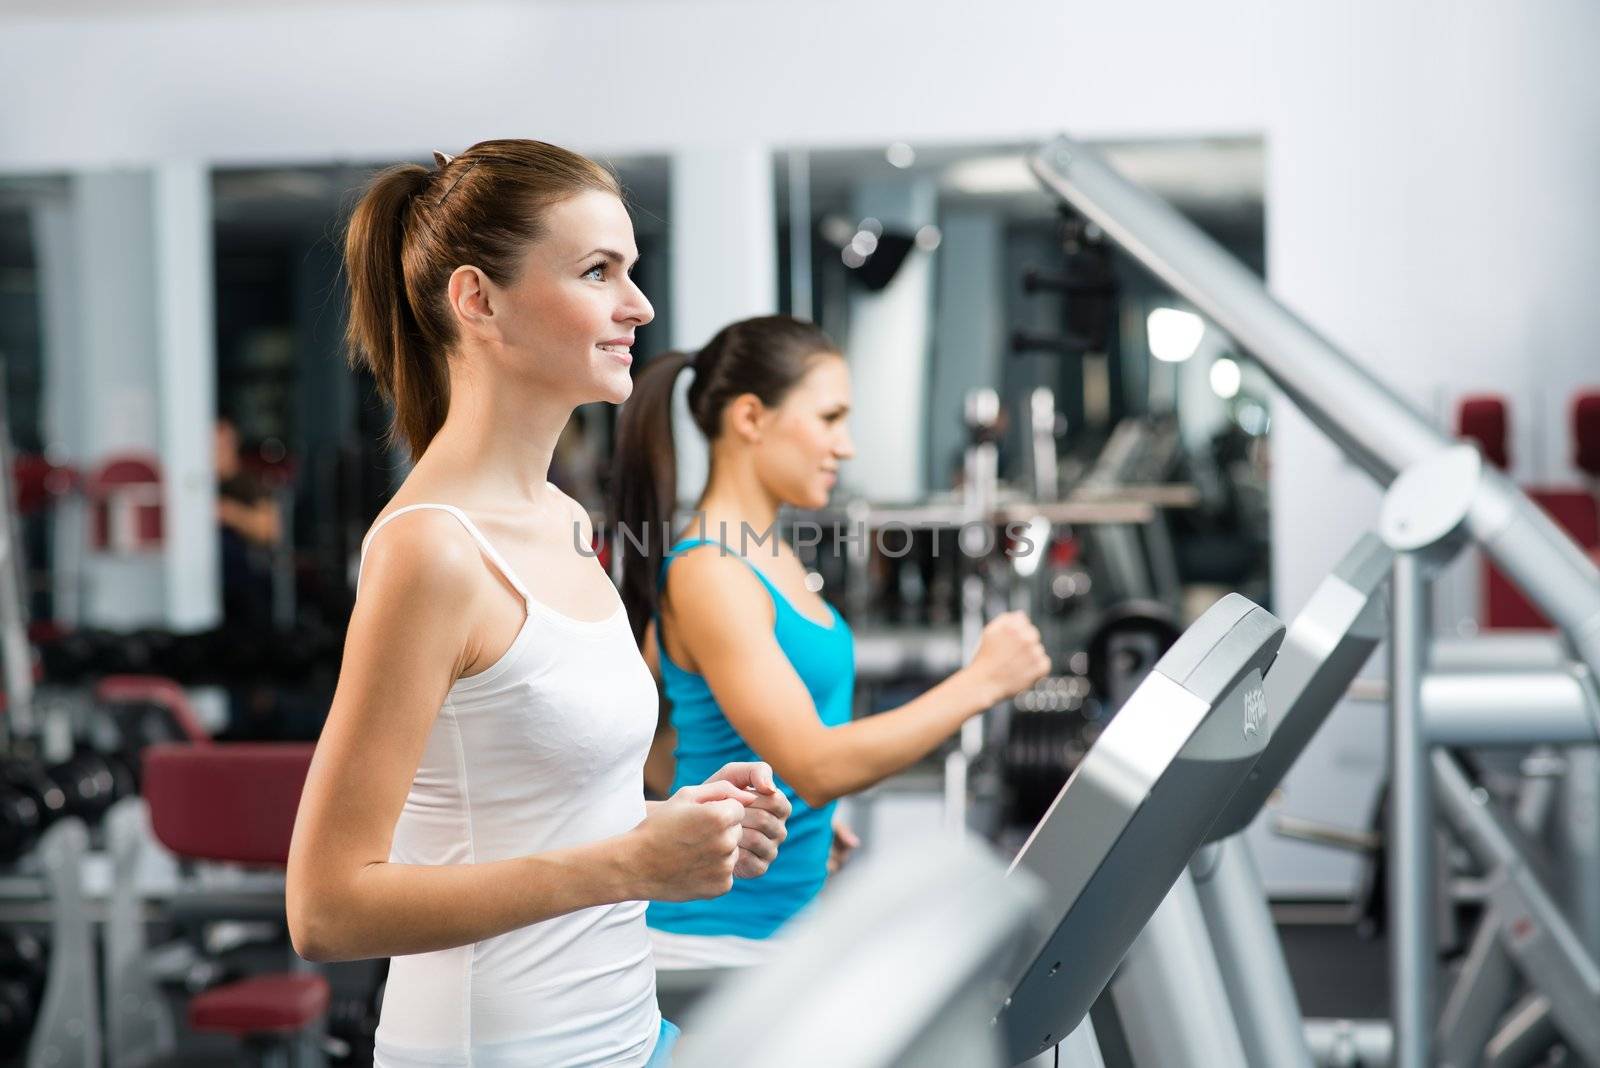 women running on a treadmill in a fitness club, sport in the fitness club